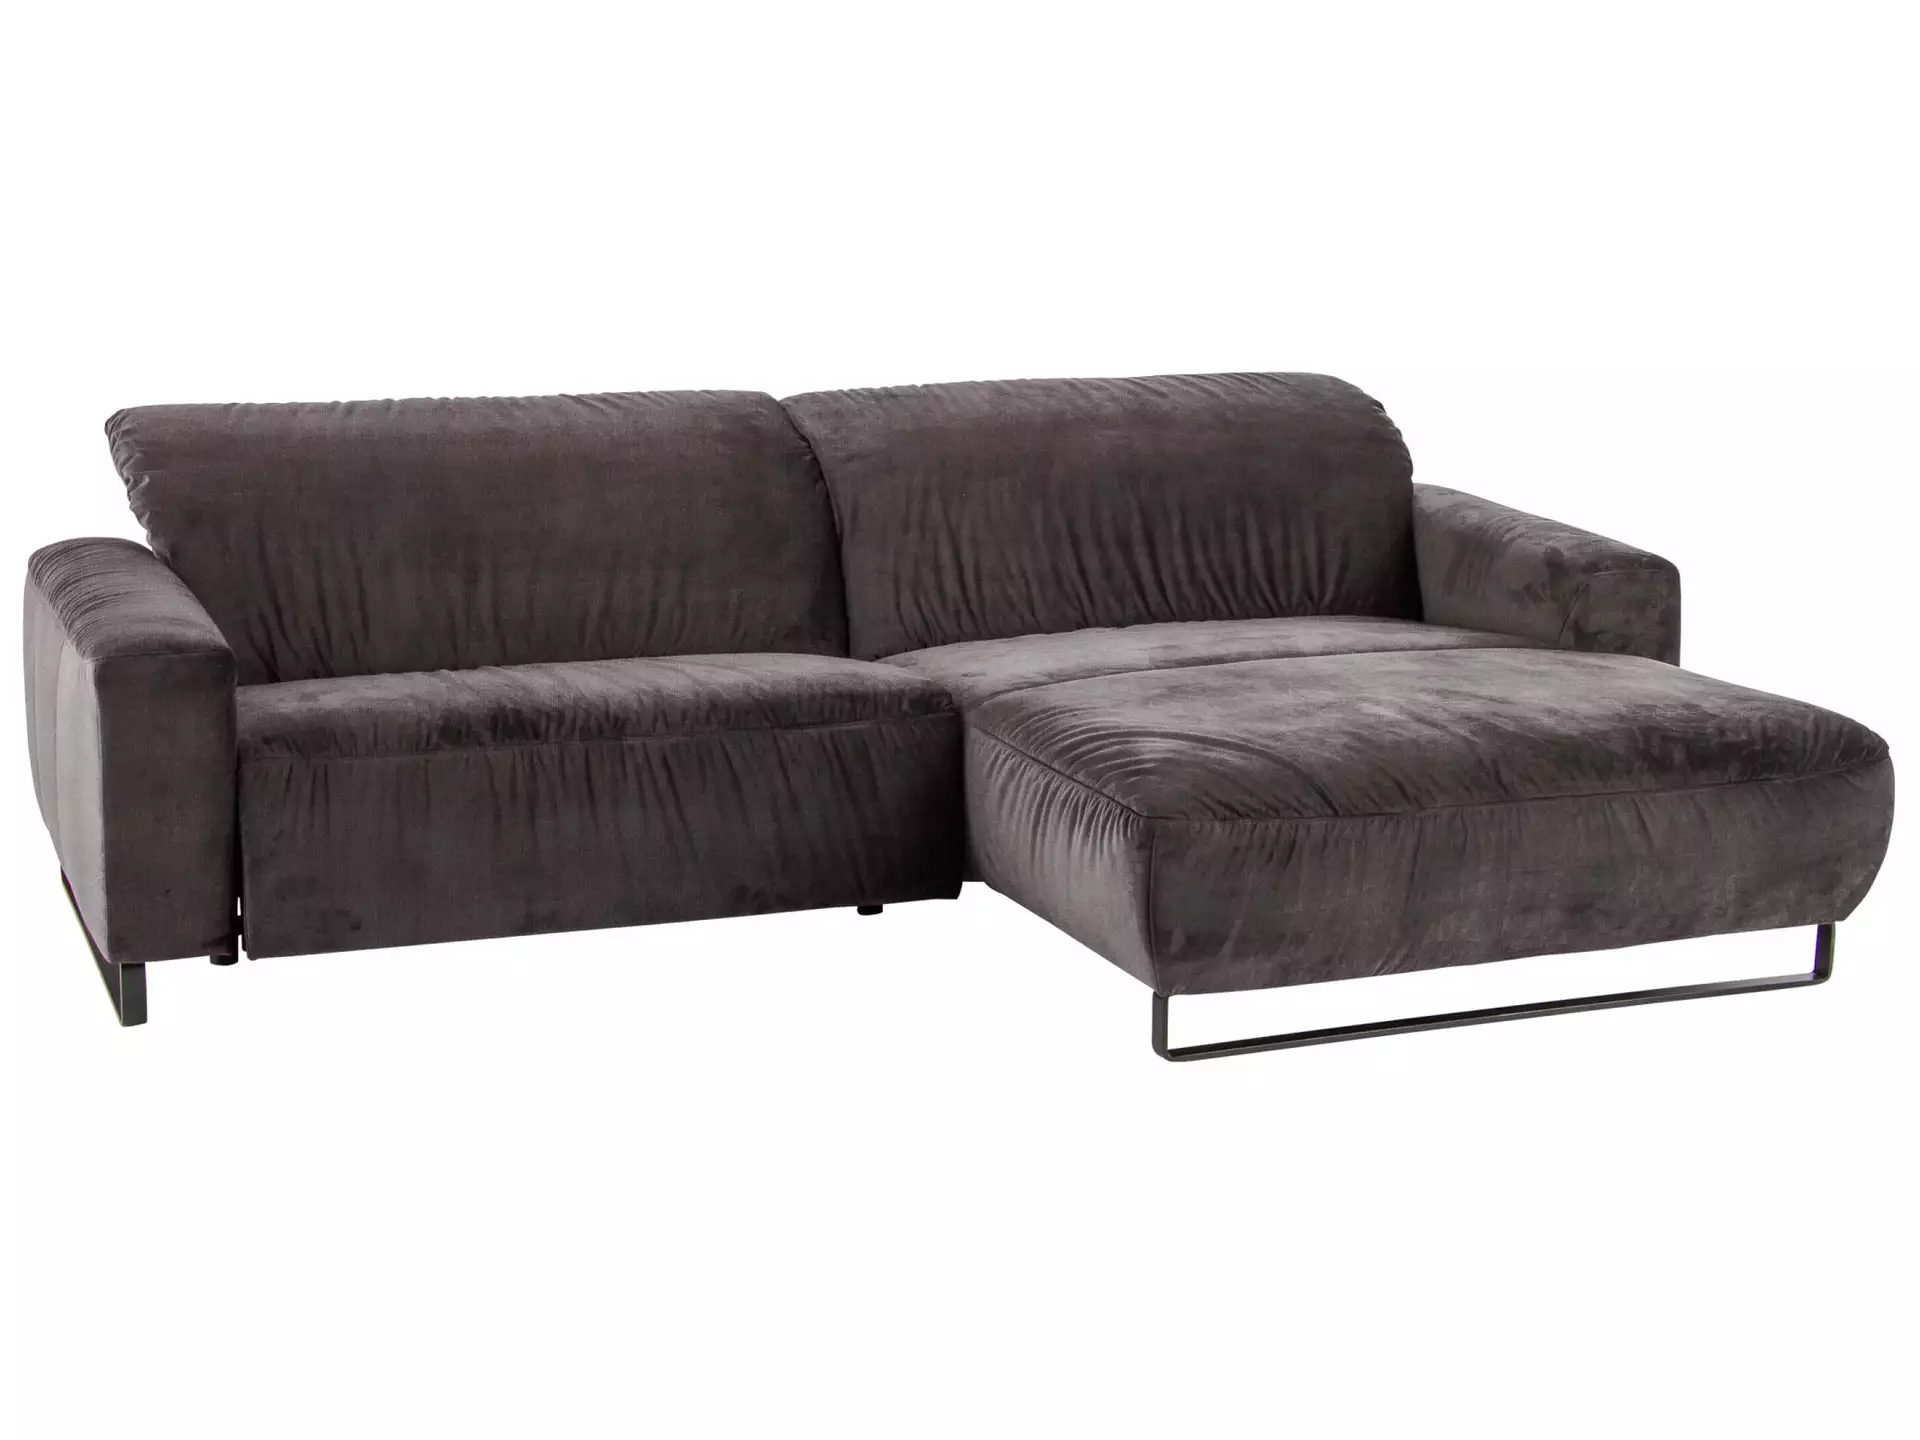 Ecksofa Eindhoven Basic Candy / Farbe: Steel / Material: Stoff Basic